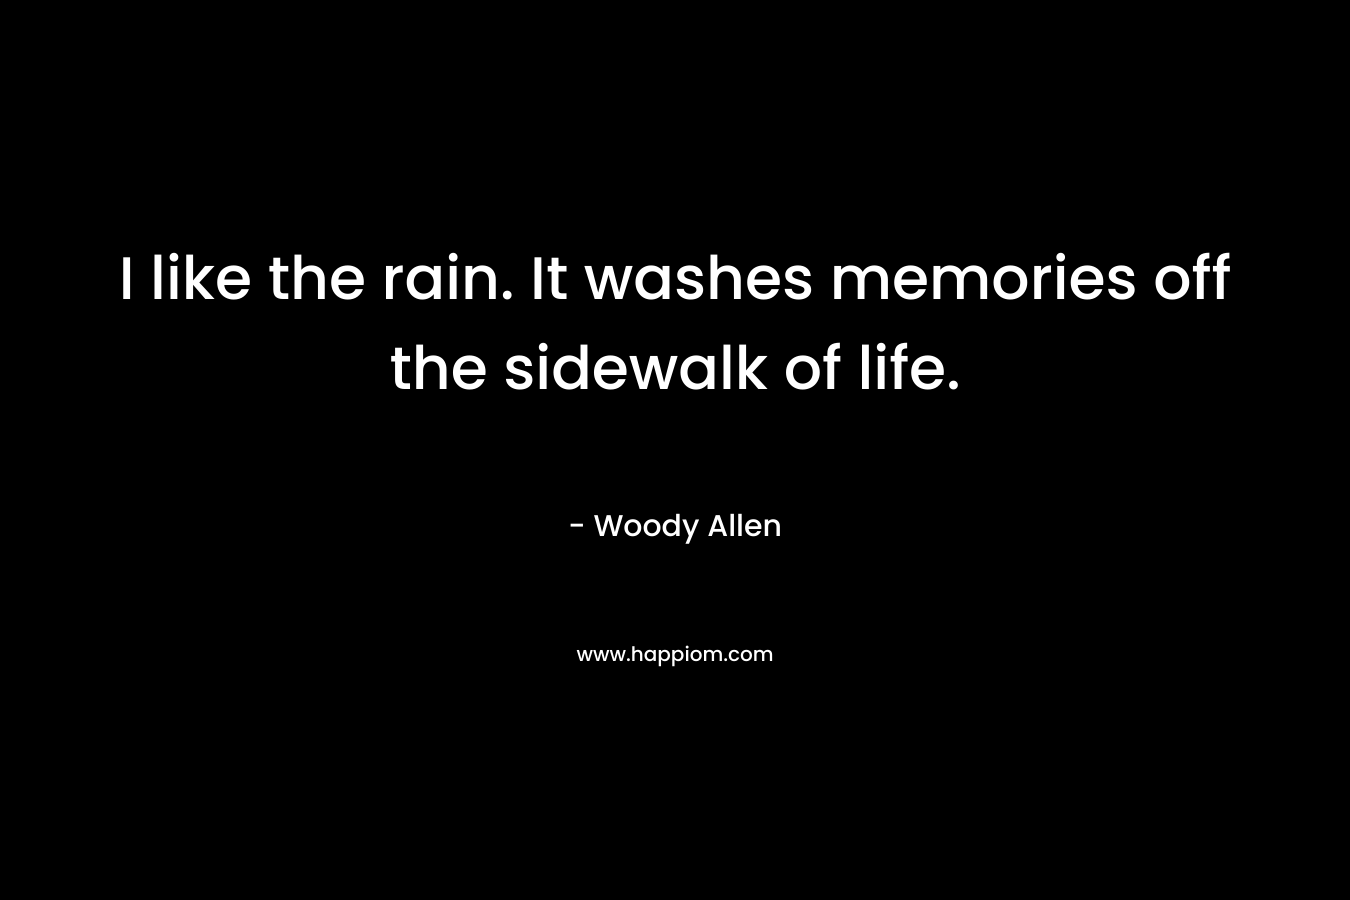 I like the rain. It washes memories off the sidewalk of life. – Woody Allen